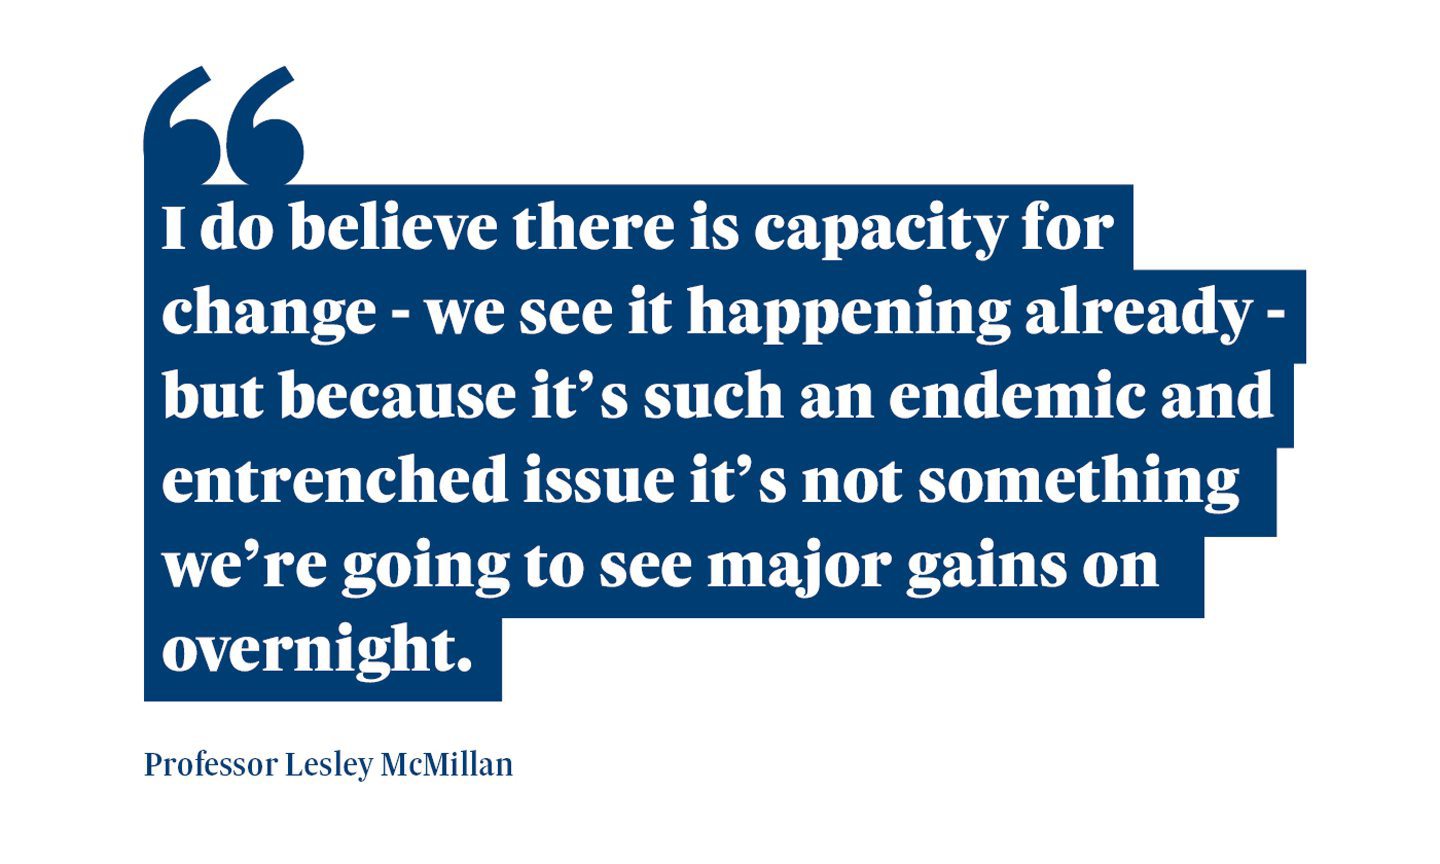 A quote from Professor Lesley McMillan saying: “I do believe there is capacity for change - we see it happening already - but because it’s such an endemic and entrenched issue it’s not something we’re going to see major gains on overnight.”